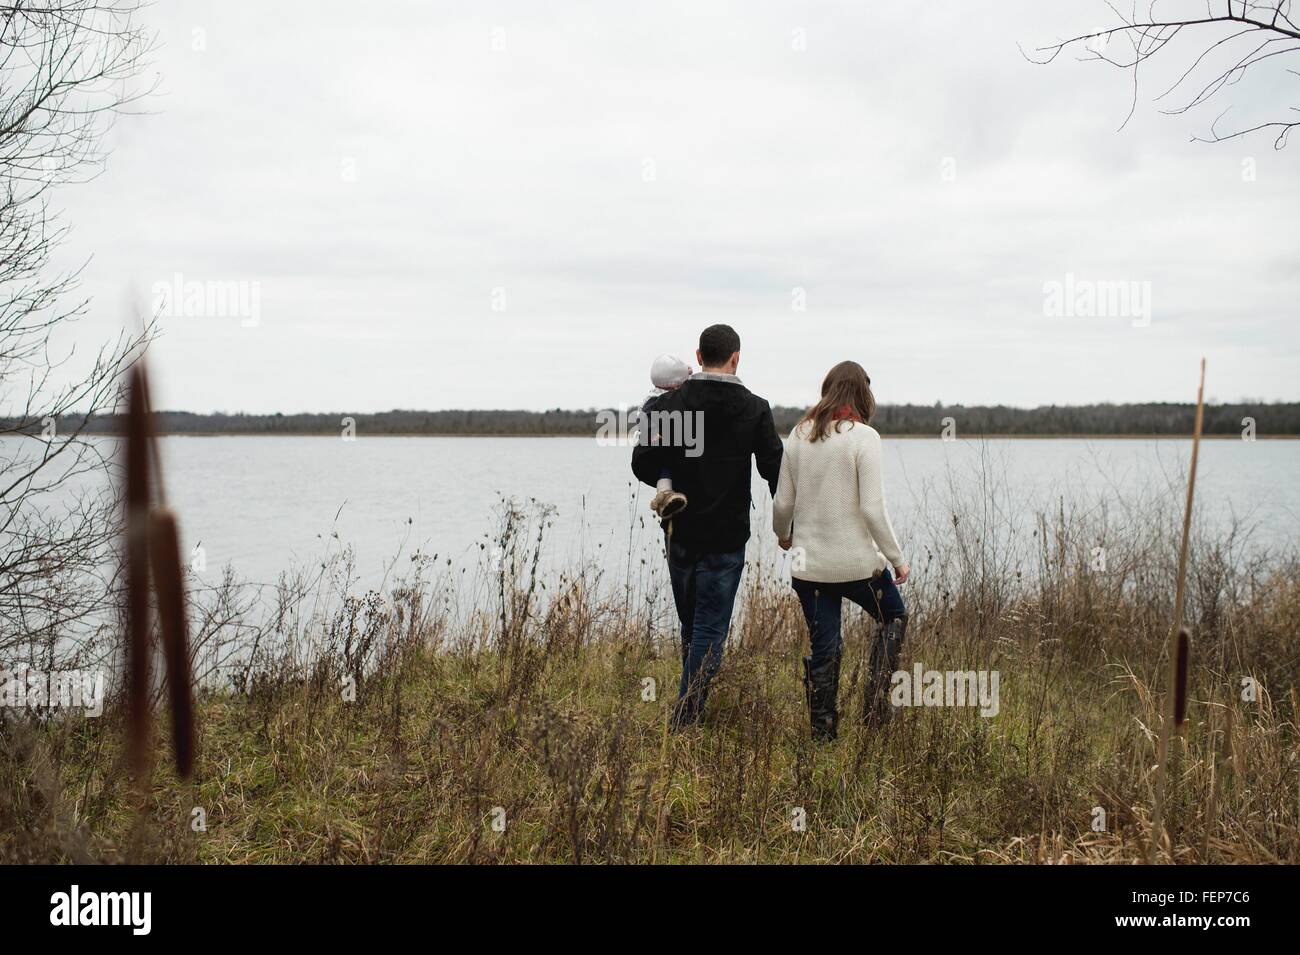 Young family walking outdoors, beside lake, rear view Stock Photo